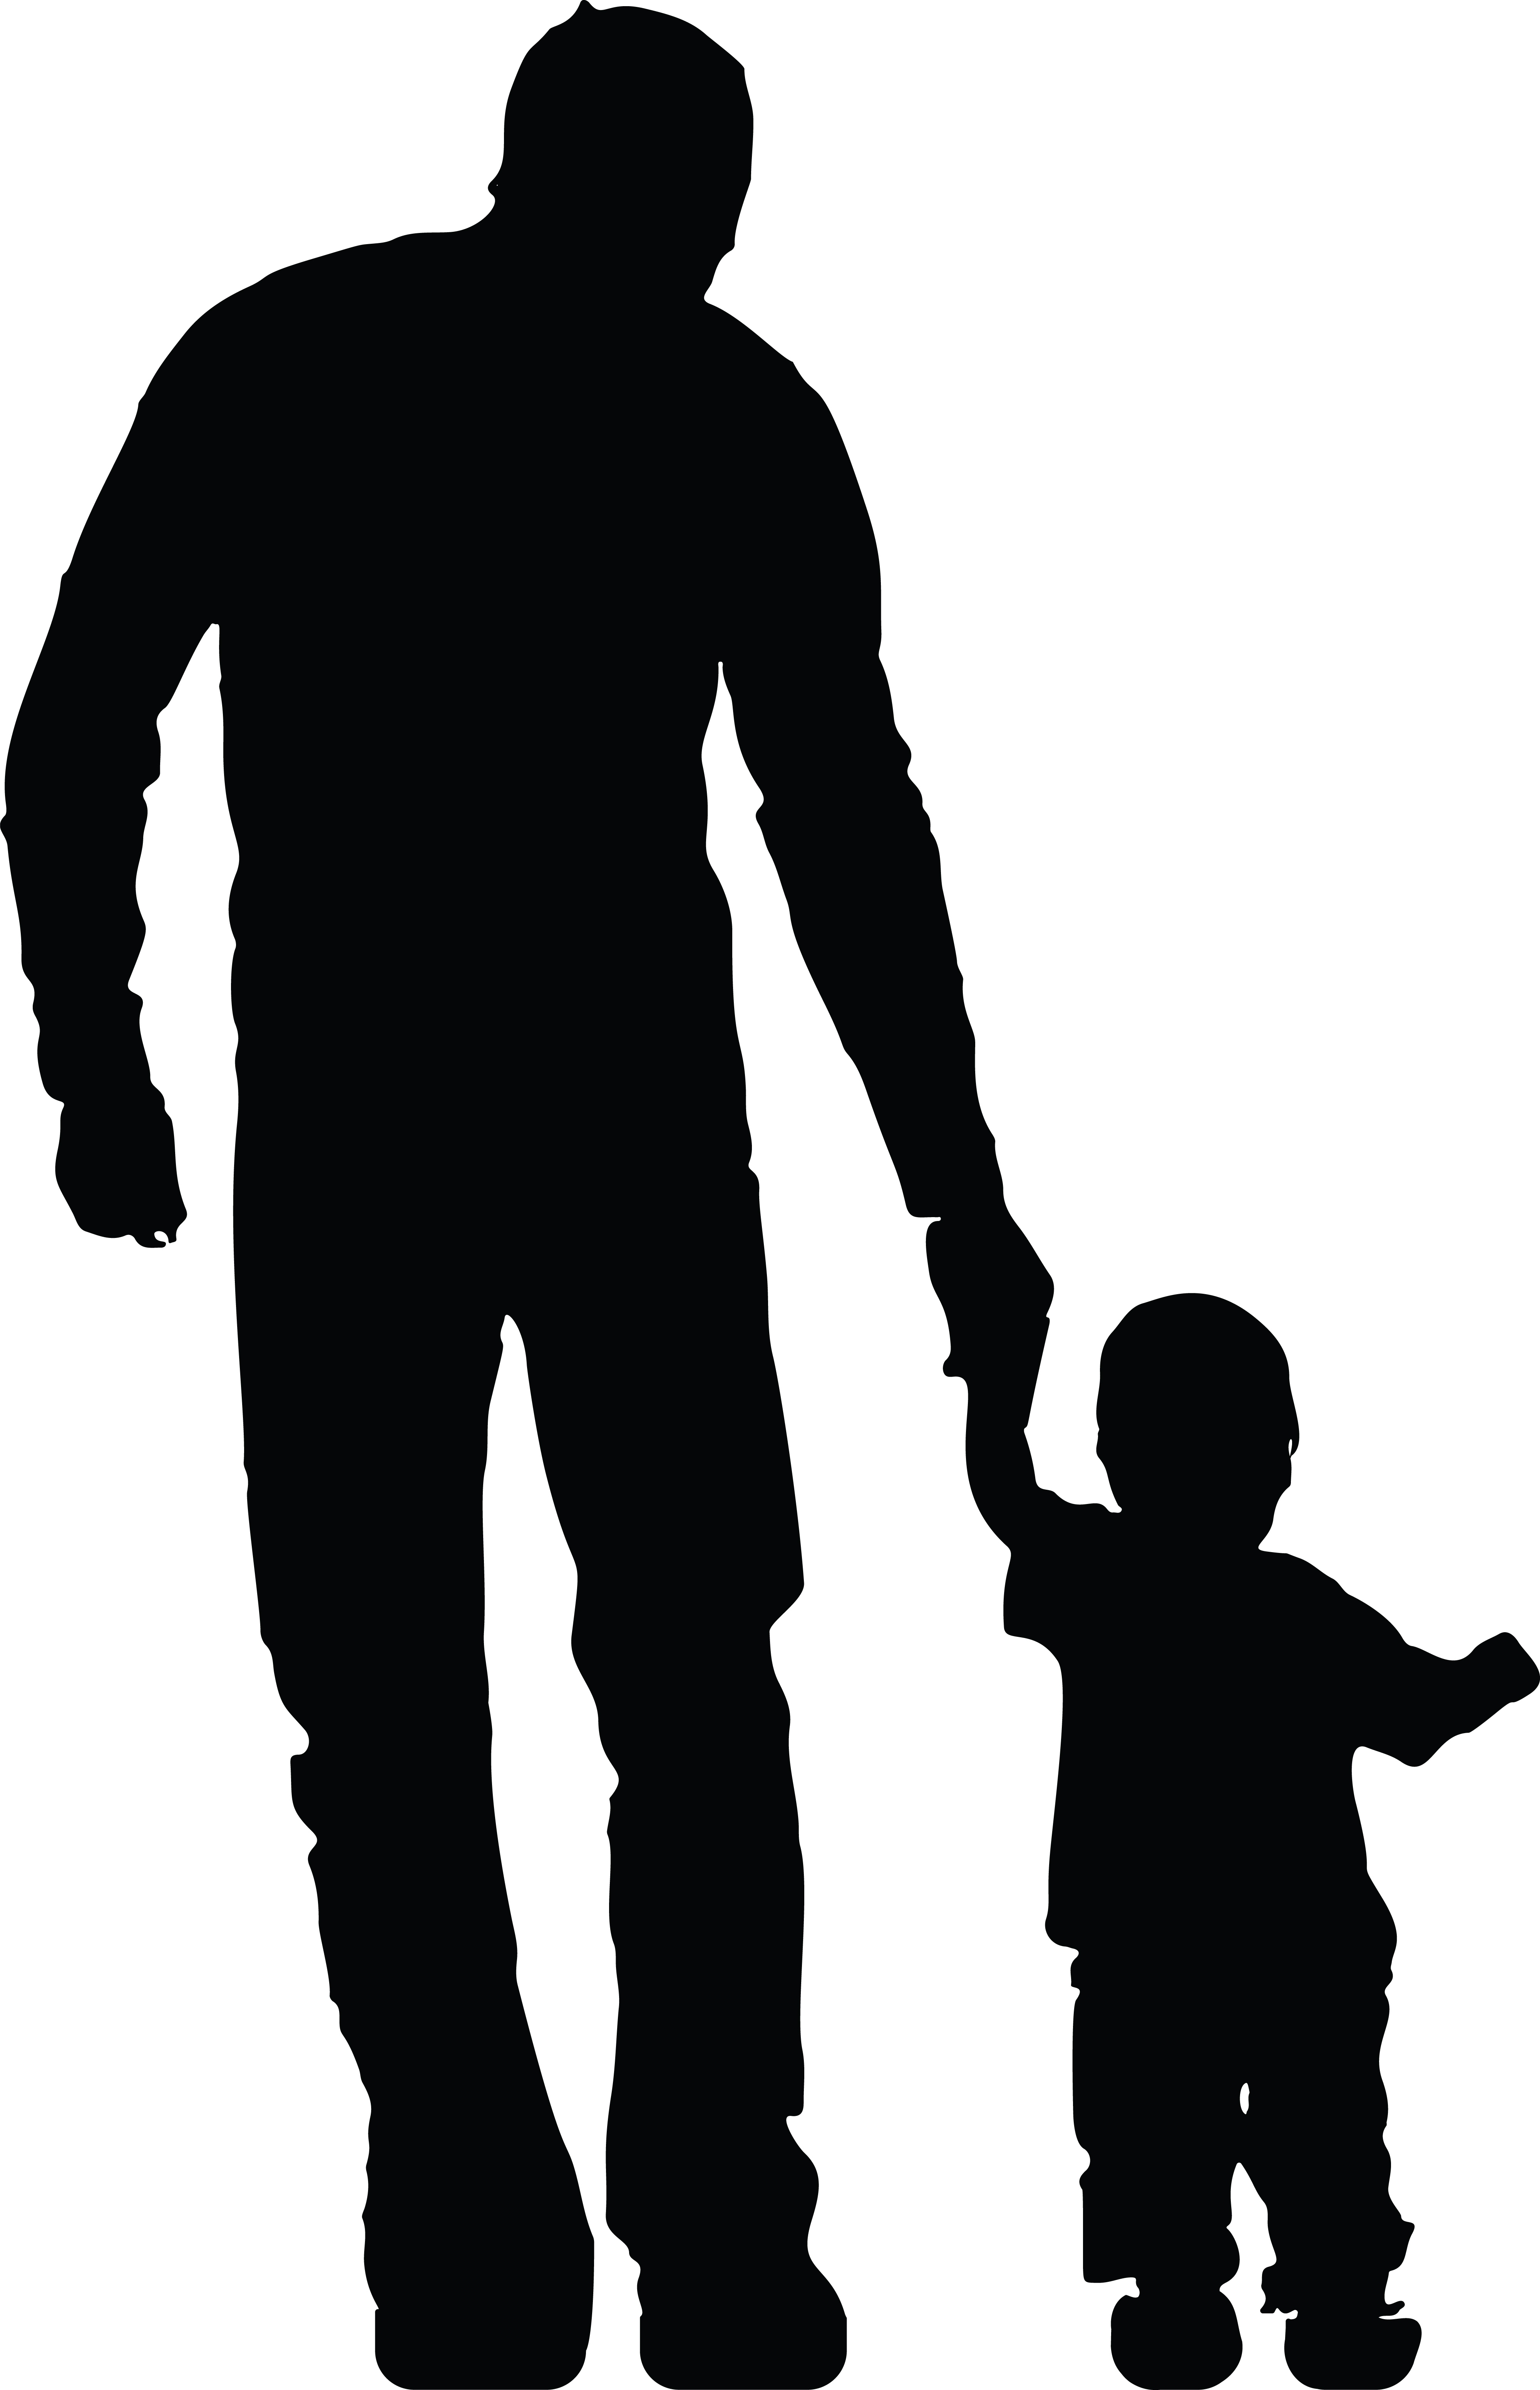 Dad clipart similar. Free of a silhouetted